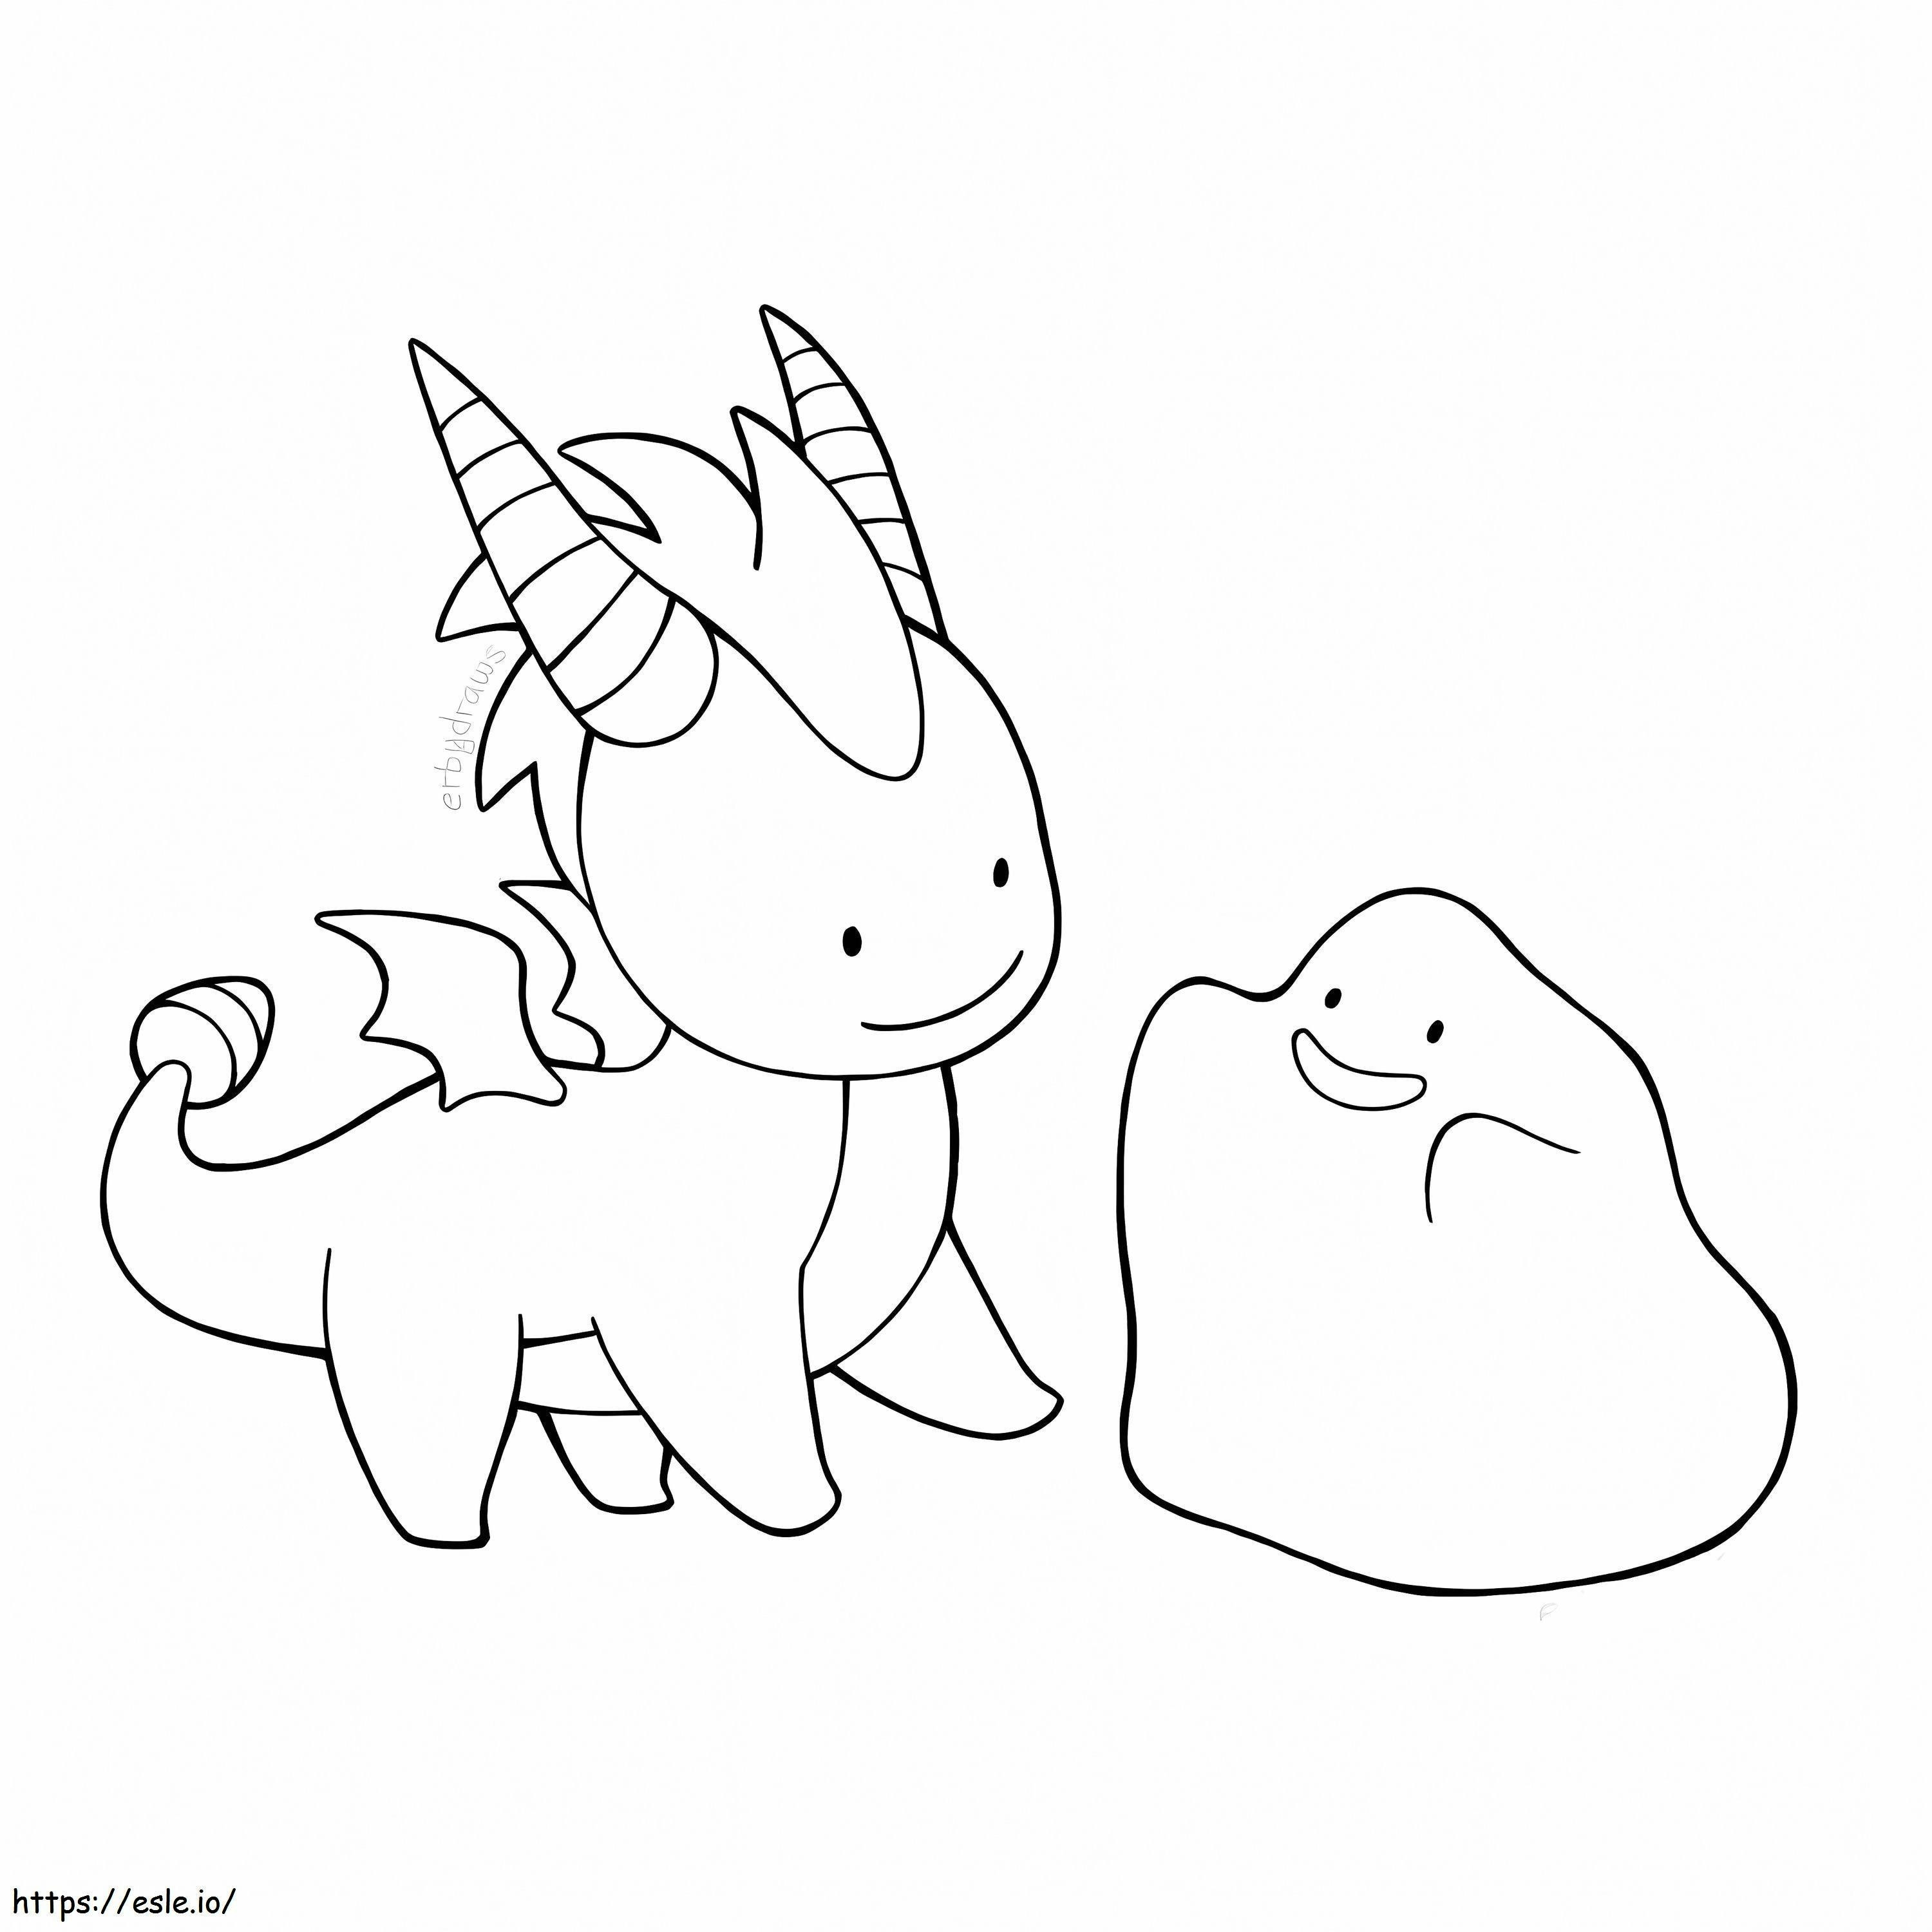 Ditto 7 coloring page